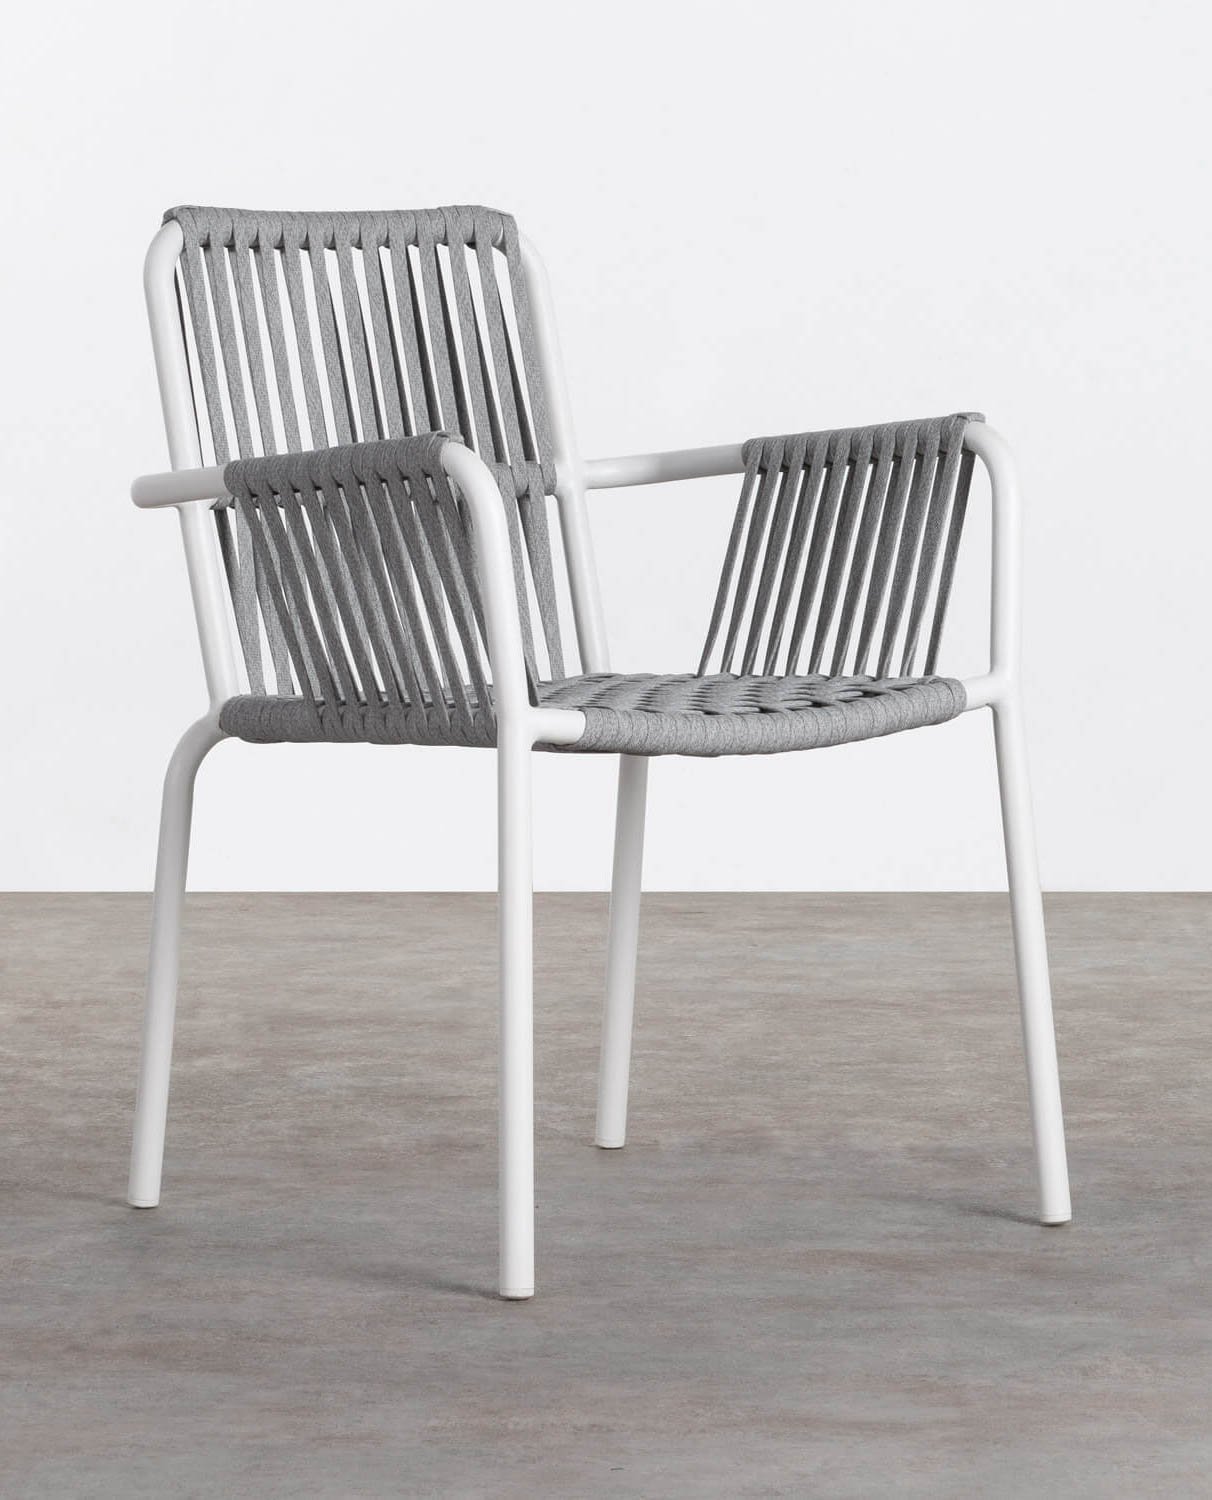 Pack of 2 Aluminium and Rope Outdoor Chairs Drian Trend, gallery image 1